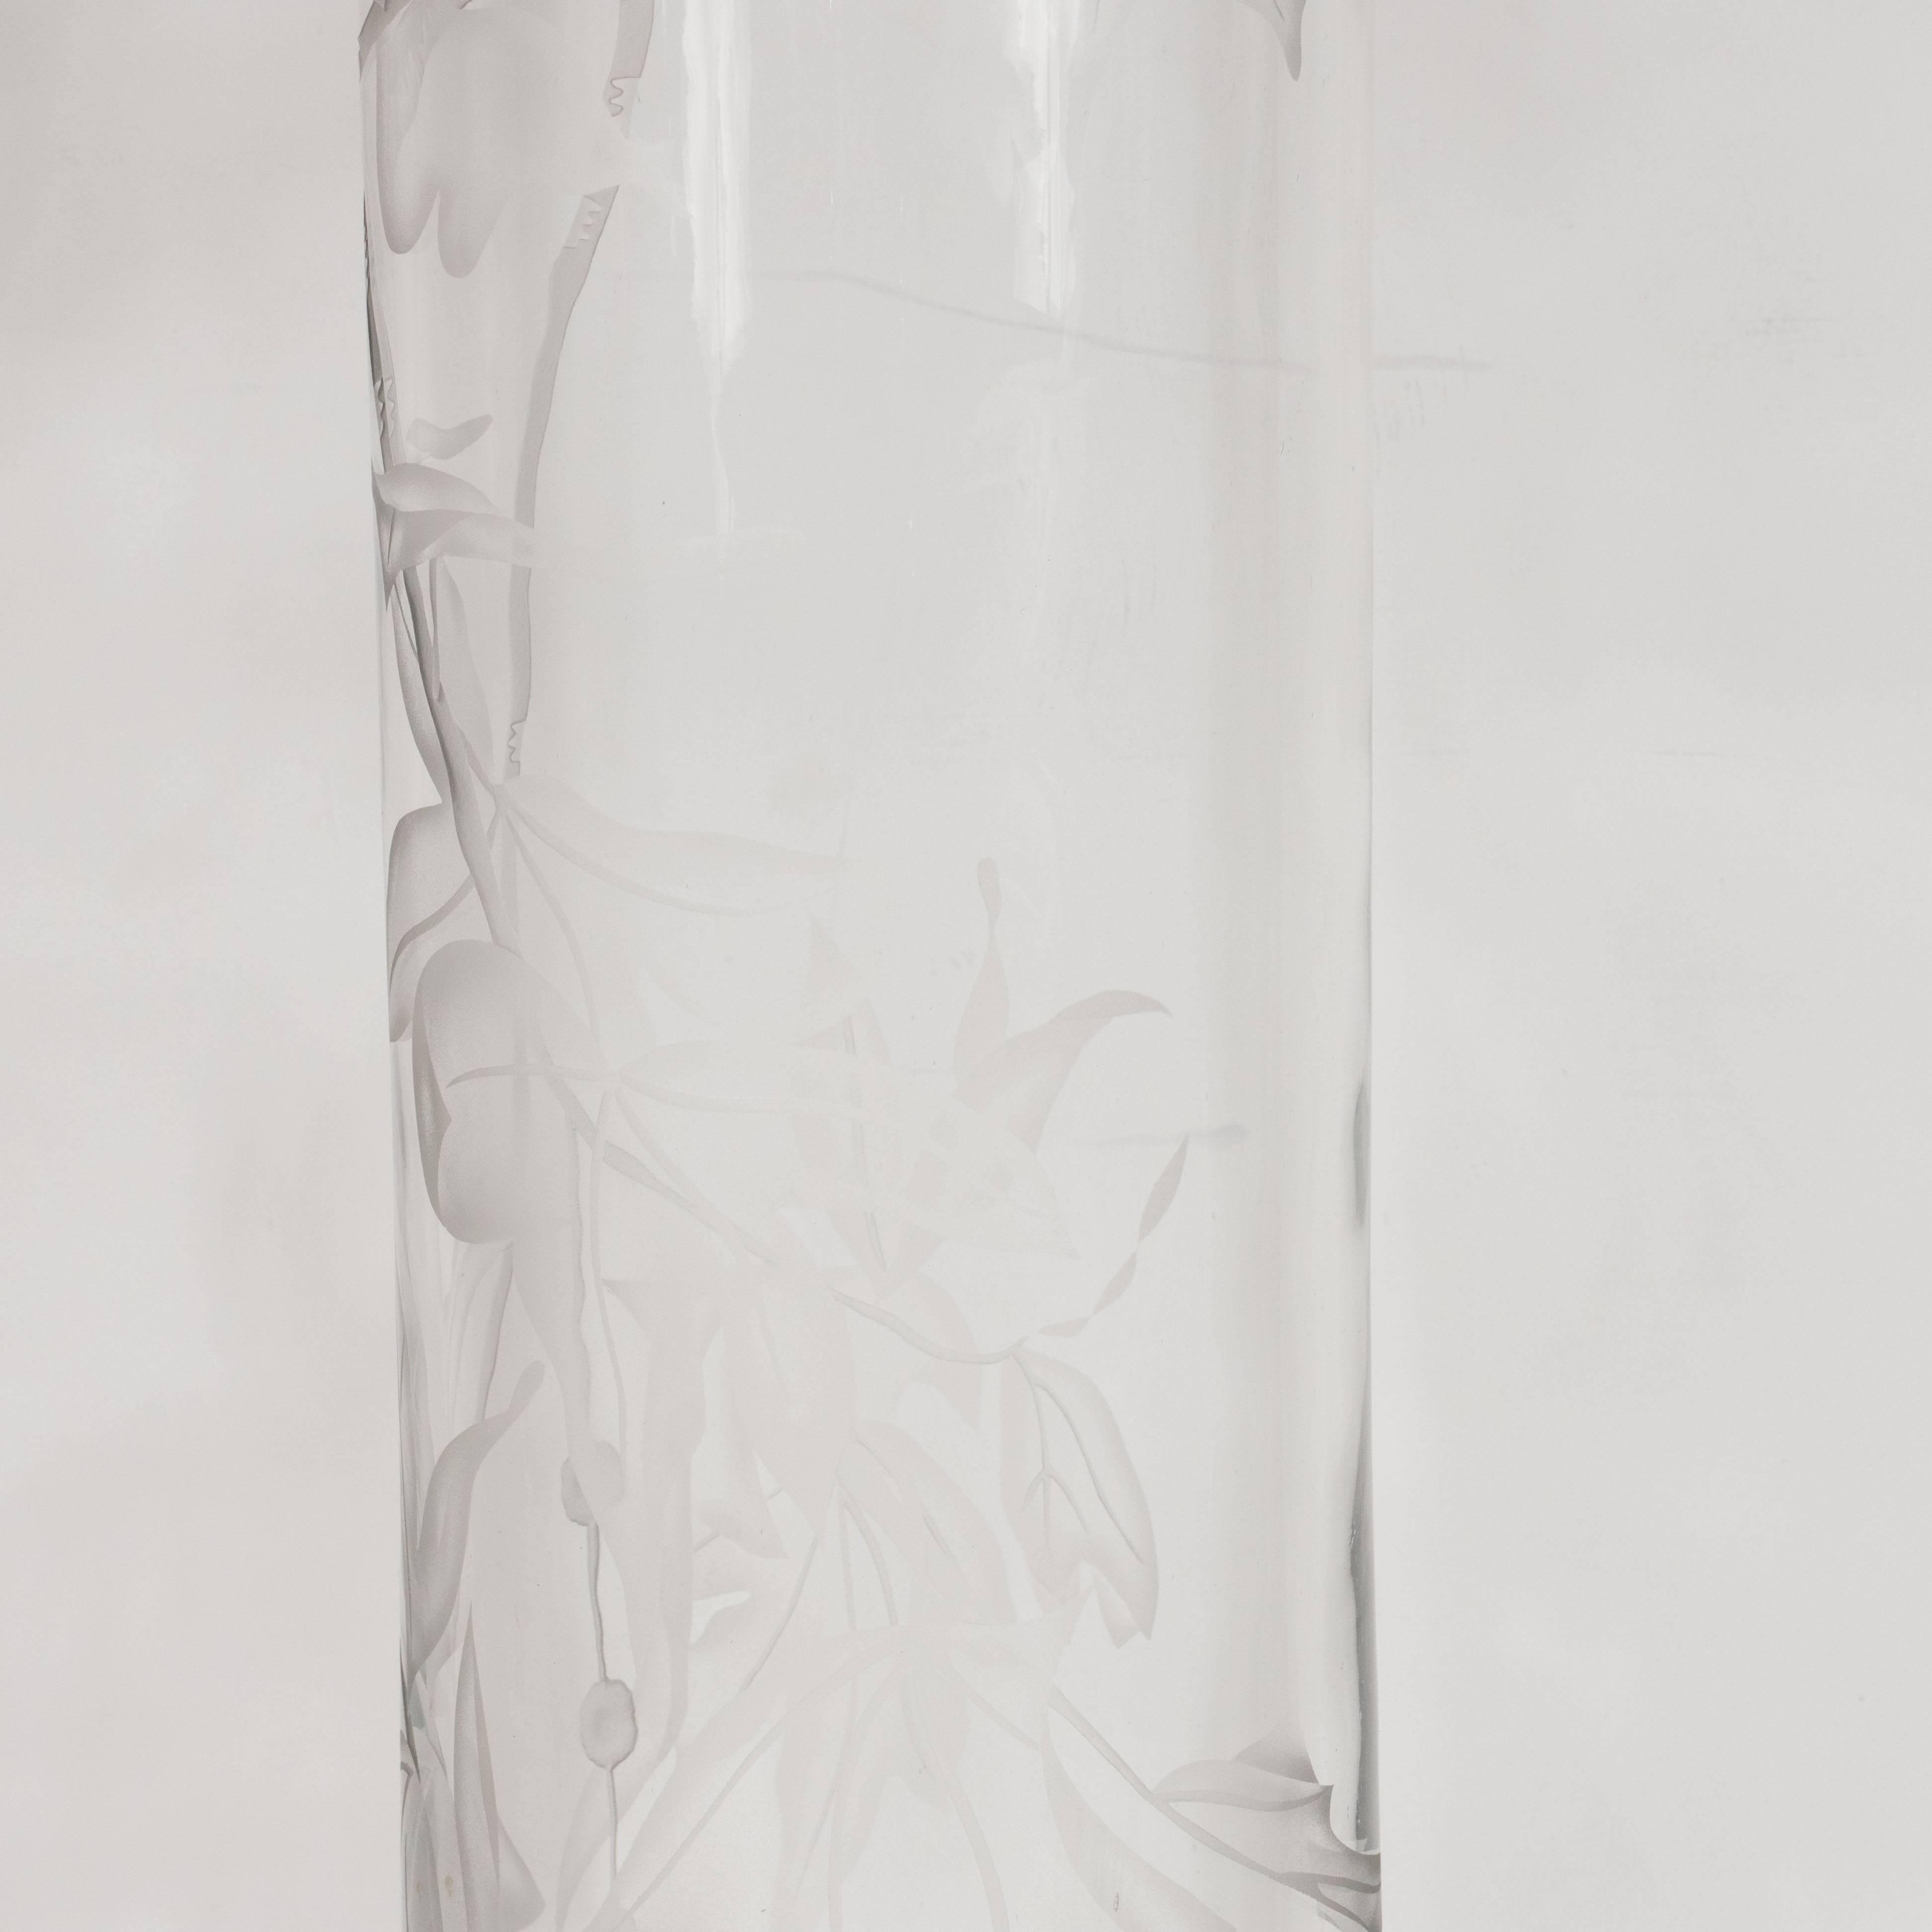 American Art Deco Acid Etched Vase with Maple Leaf Motif by Dorothy Thorpe